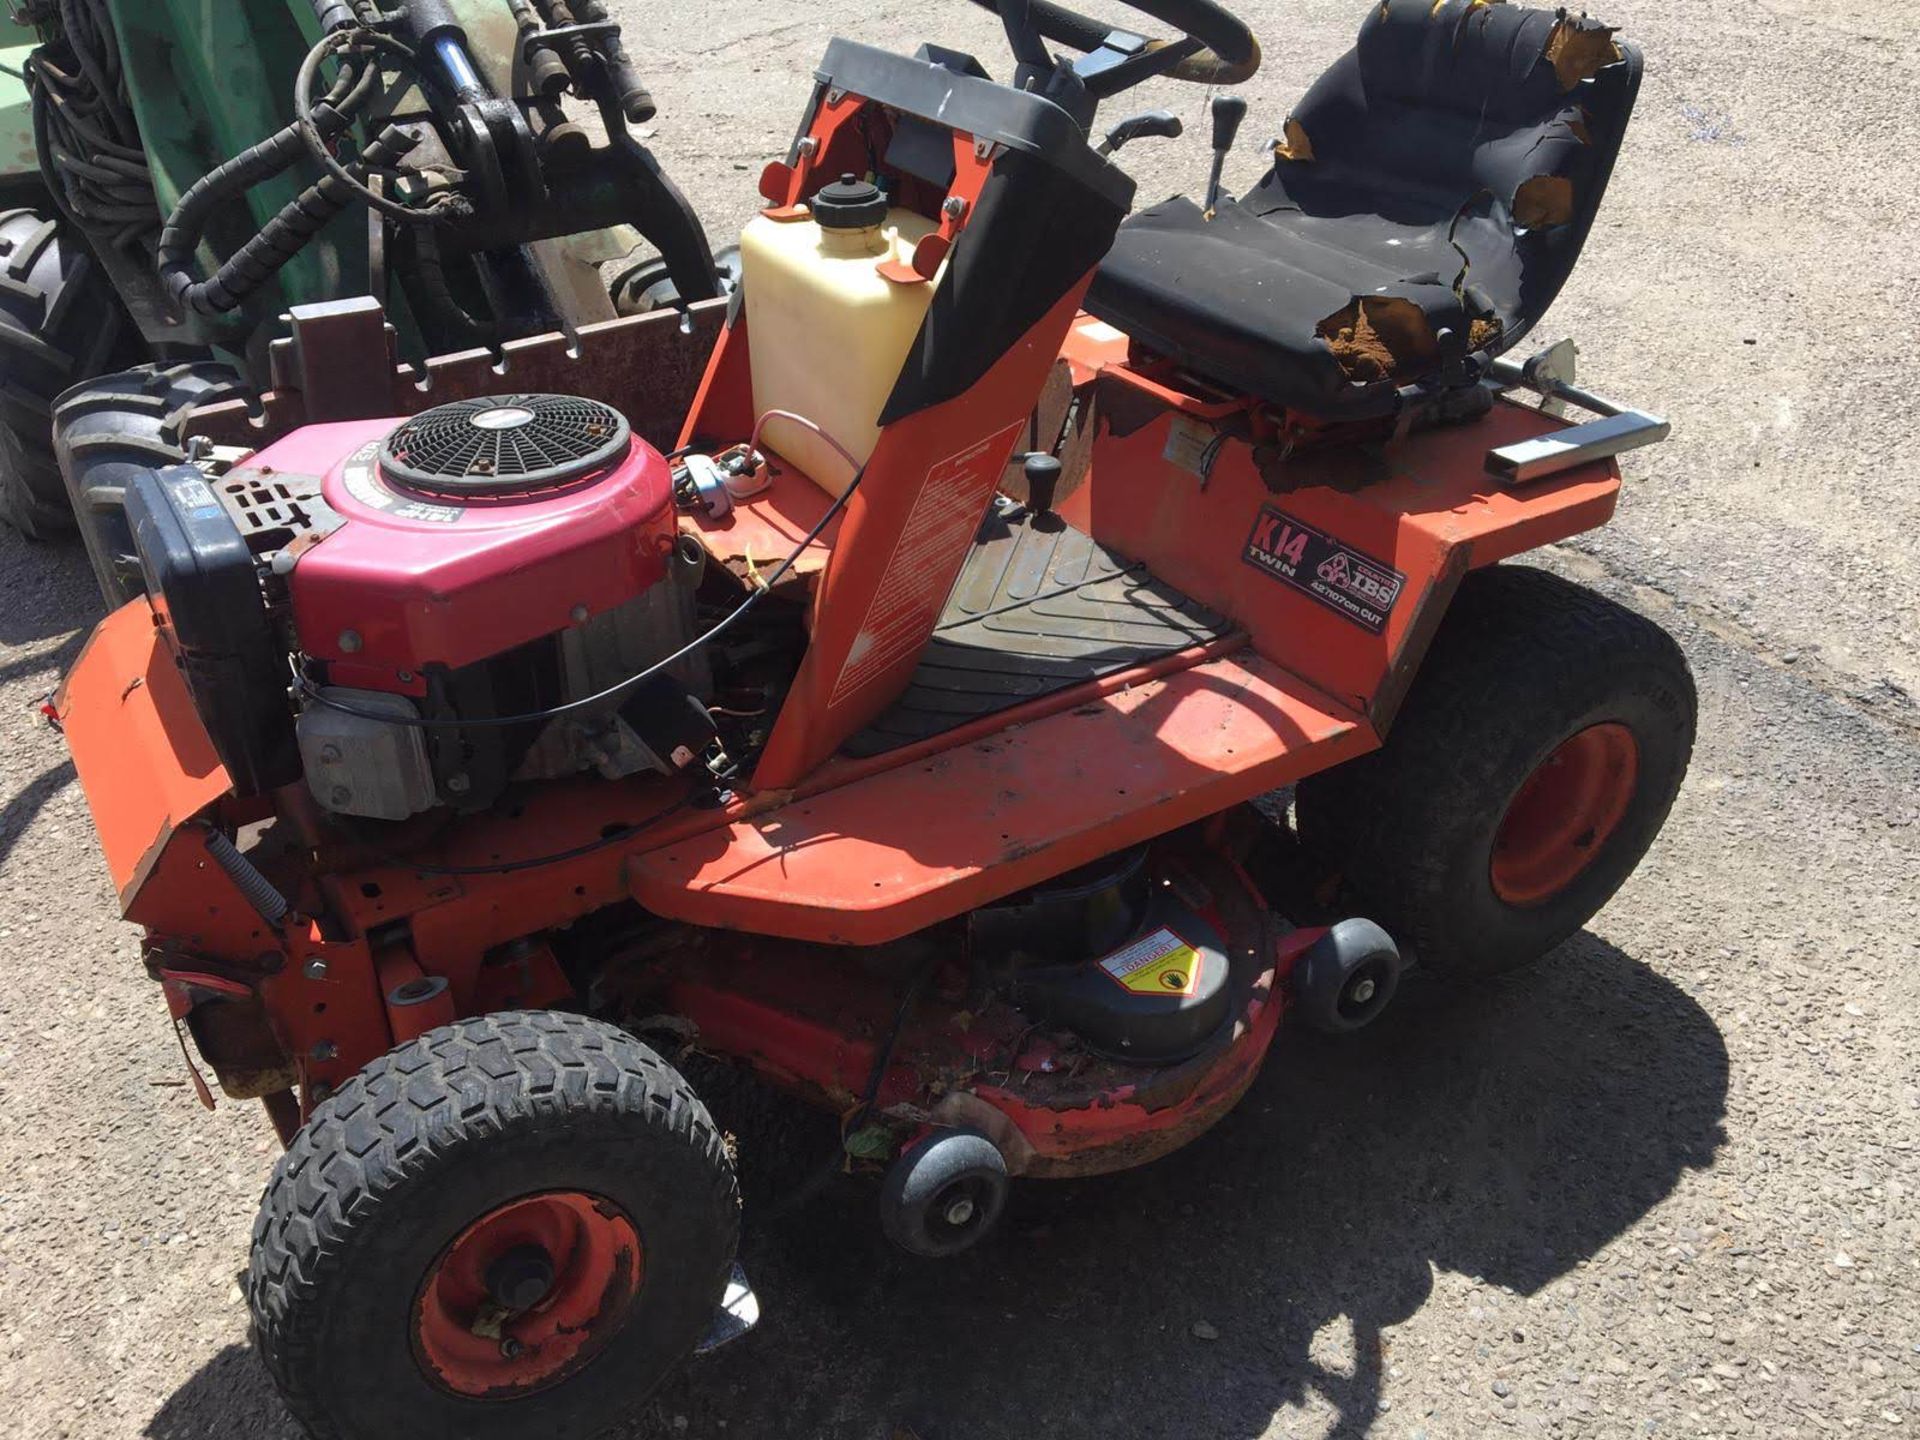 COUNTAX IBS K14 TWIN 42/107CM RIDE ON LAWN MOWER - SELLING AS SPARES / REPAIRS, NO RESERVE! *NO VAT* - Image 2 of 7